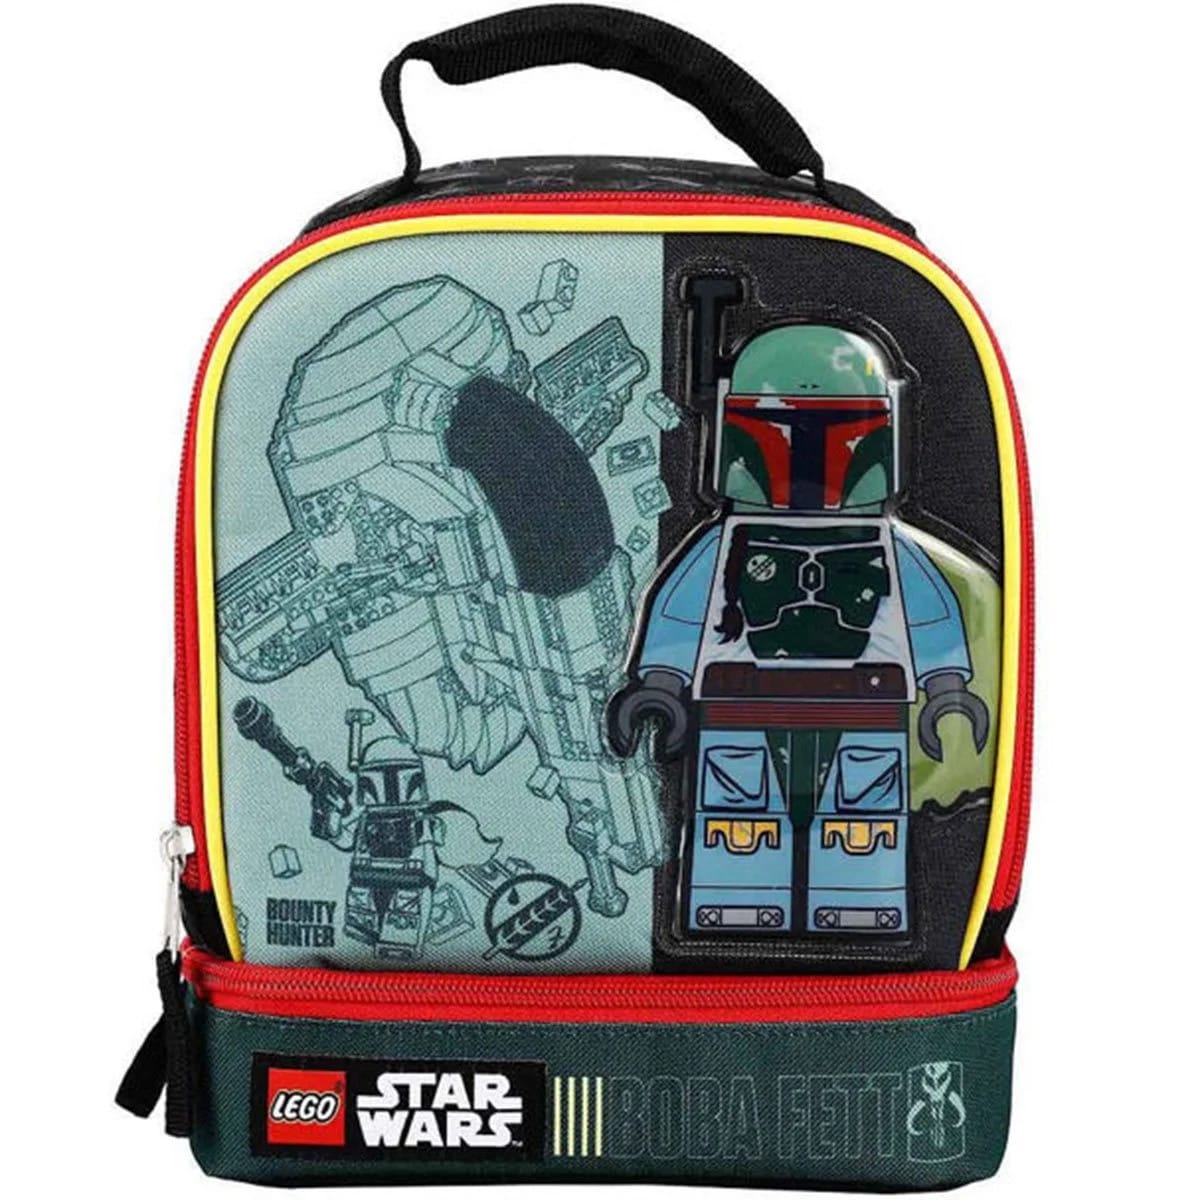 Star Wars Lunch Boxes, Lunch Bags, Lunch Totes